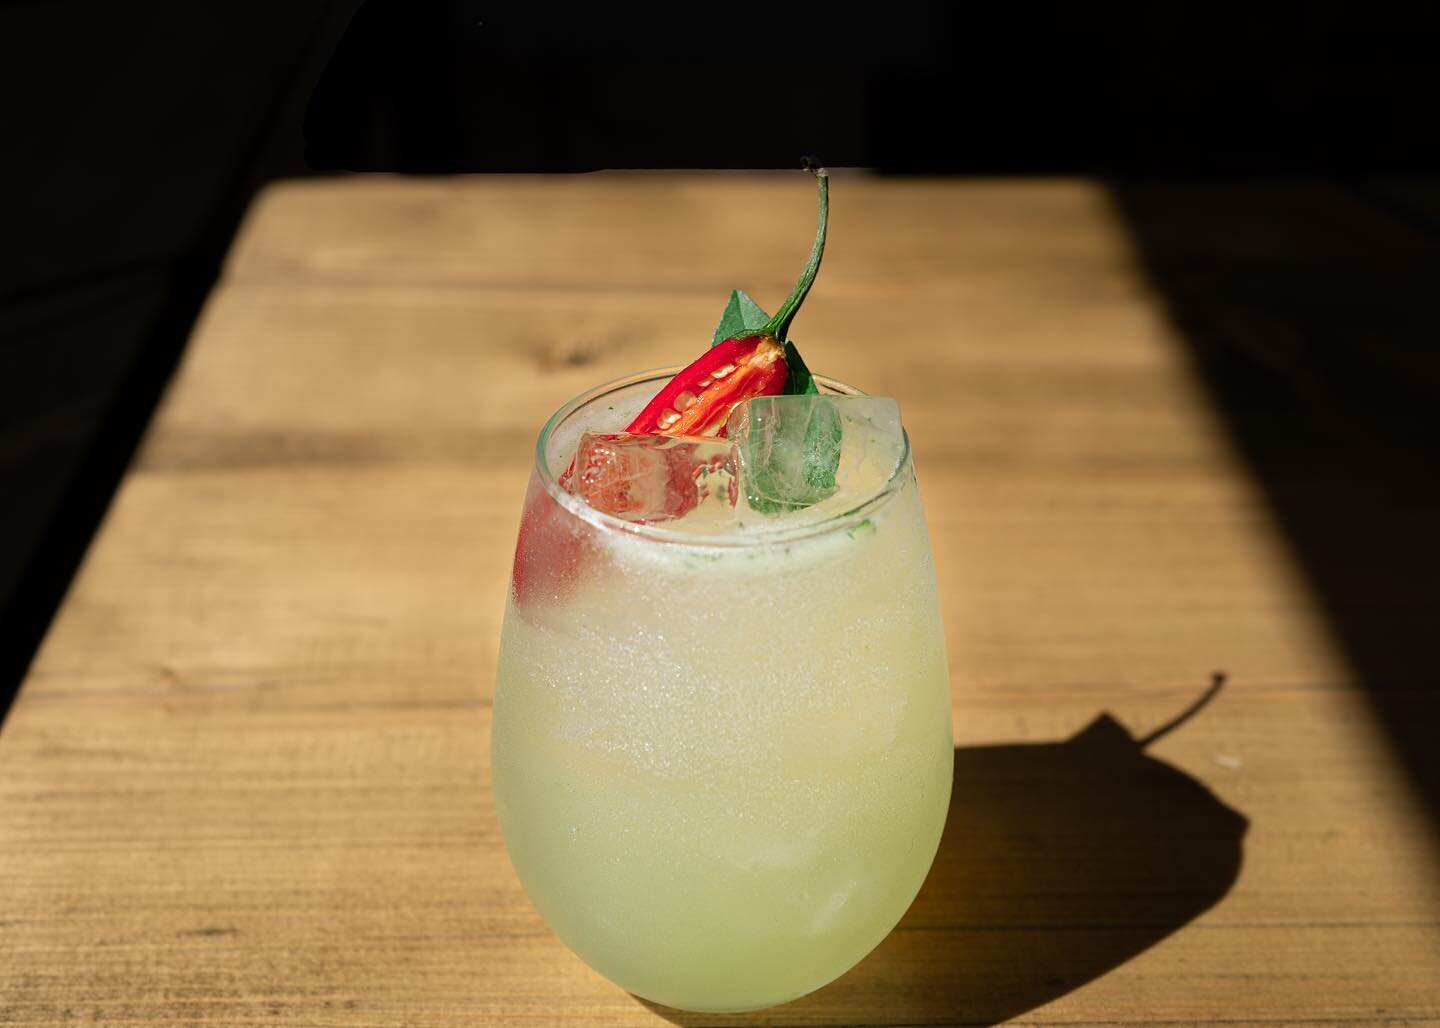 What time is it? Cocktail time! 🍹🎉☀️ Lemongrass Collins pictured - vodka, lemongrass, Thai basil, fresh lime juice and chillies. Essential Thai flavours in a glass 👌
.
.
.
#LeatherLane #Clerkenwell #LondonEats #LondonFood #londonrestaurants #Londo